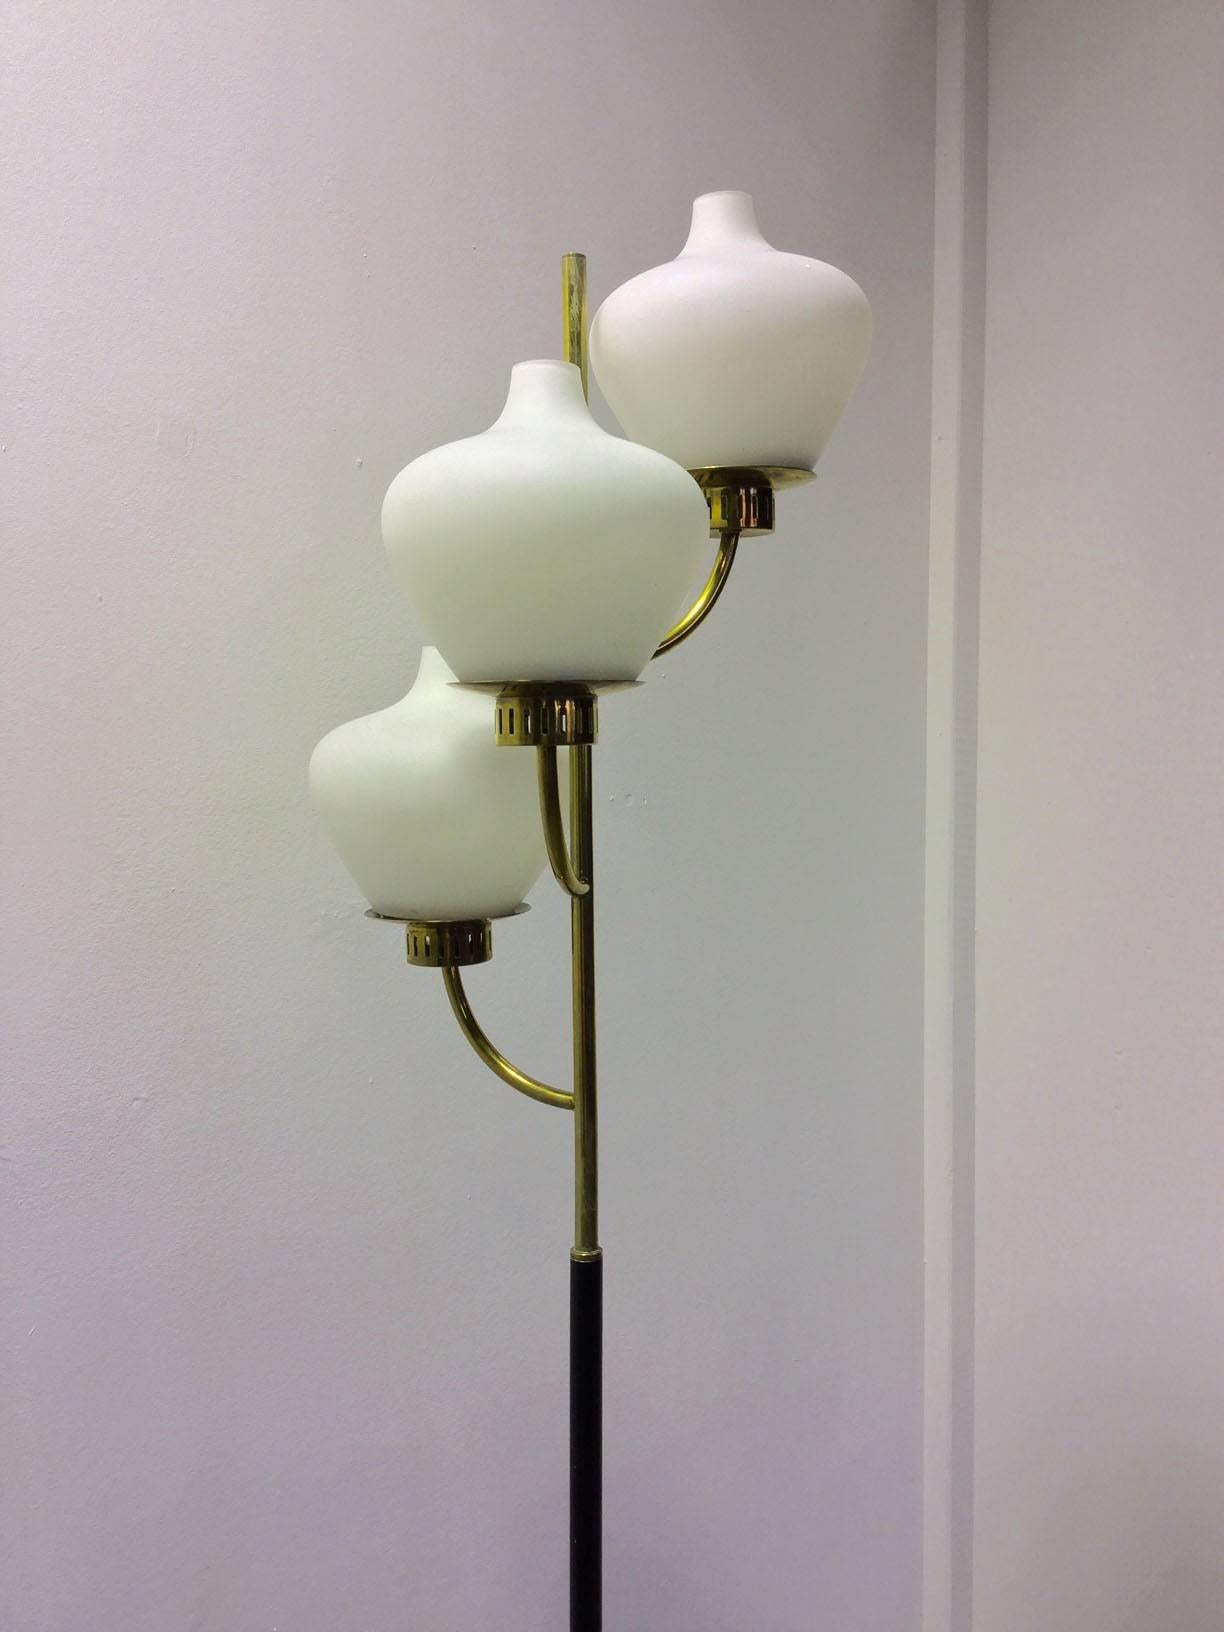 Very nice floor lamp with marble base and black metal stem surmounted by three brass arms with white opaline globe as diffusers.
Wire system is functioning.
Made in Italy by Stilnovo in 1950, label on the structure.